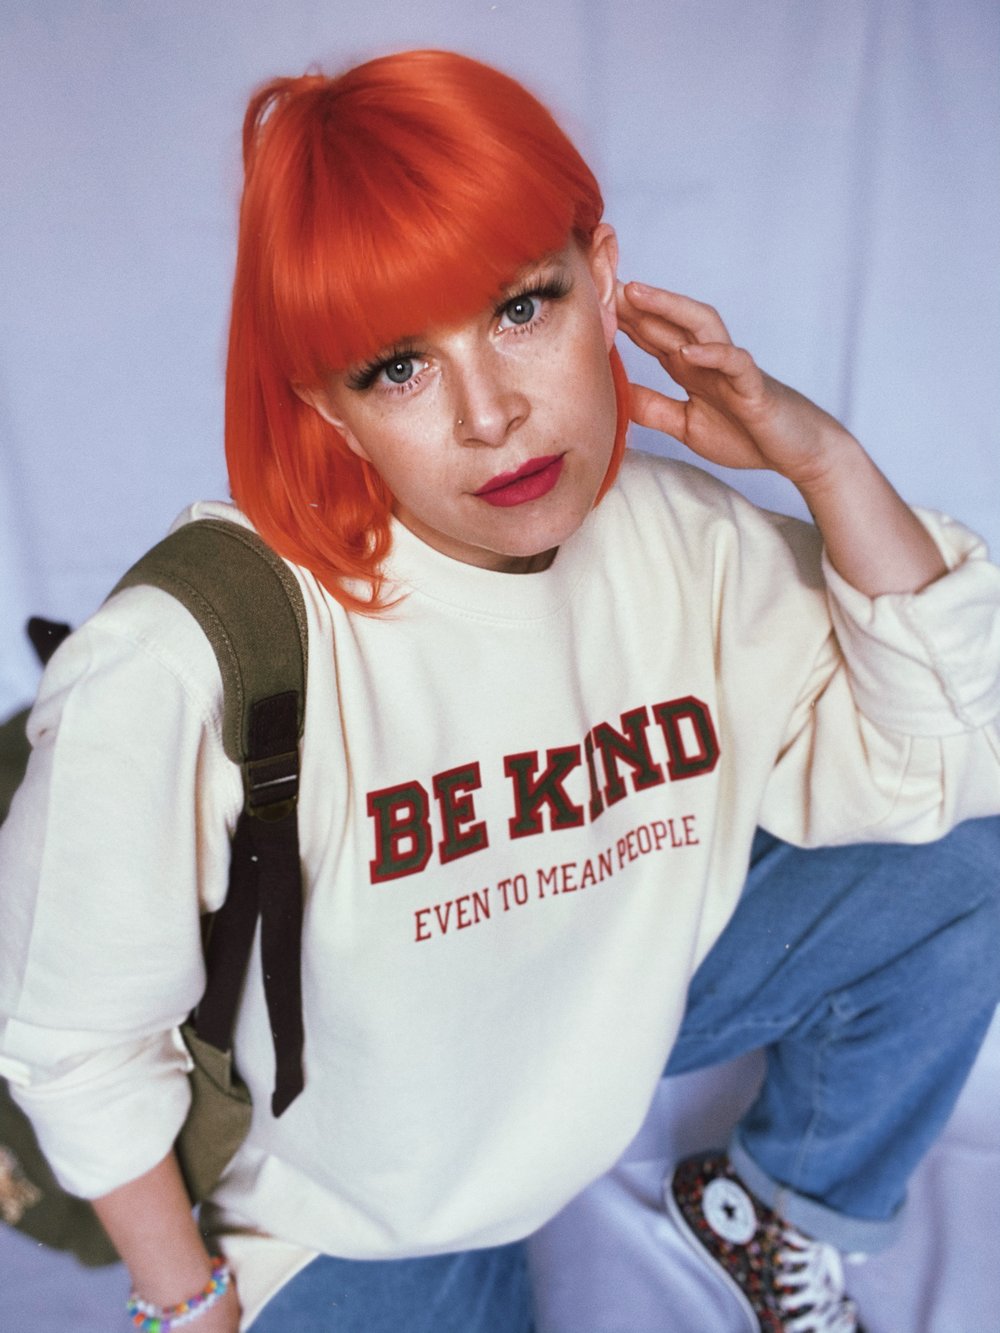 Image of Be kind even to mean people varsity sweat 